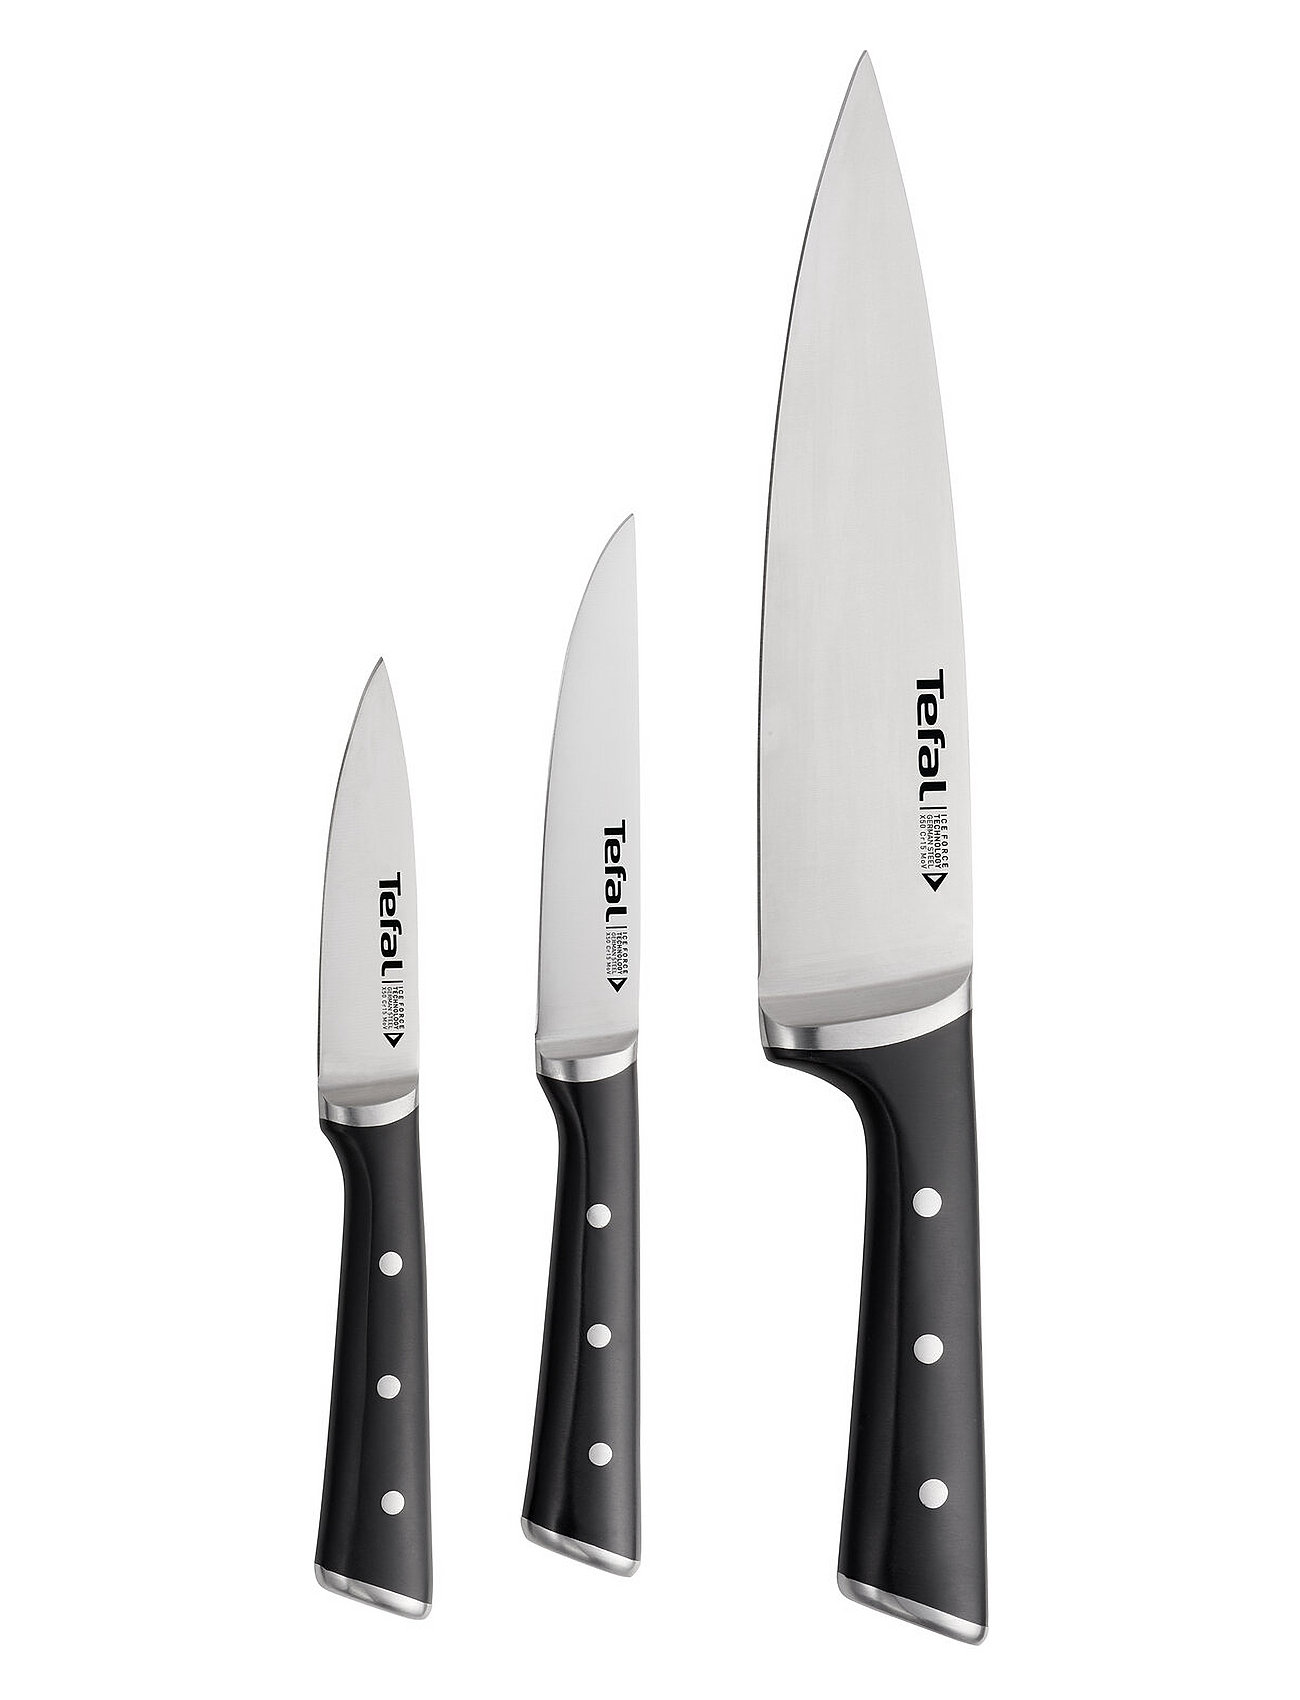 Ice Force Set 3Pcs Pairing-, Utility-, Chef Knife Home Kitchen Knives & Accessories Knife Sets Silver Tefal